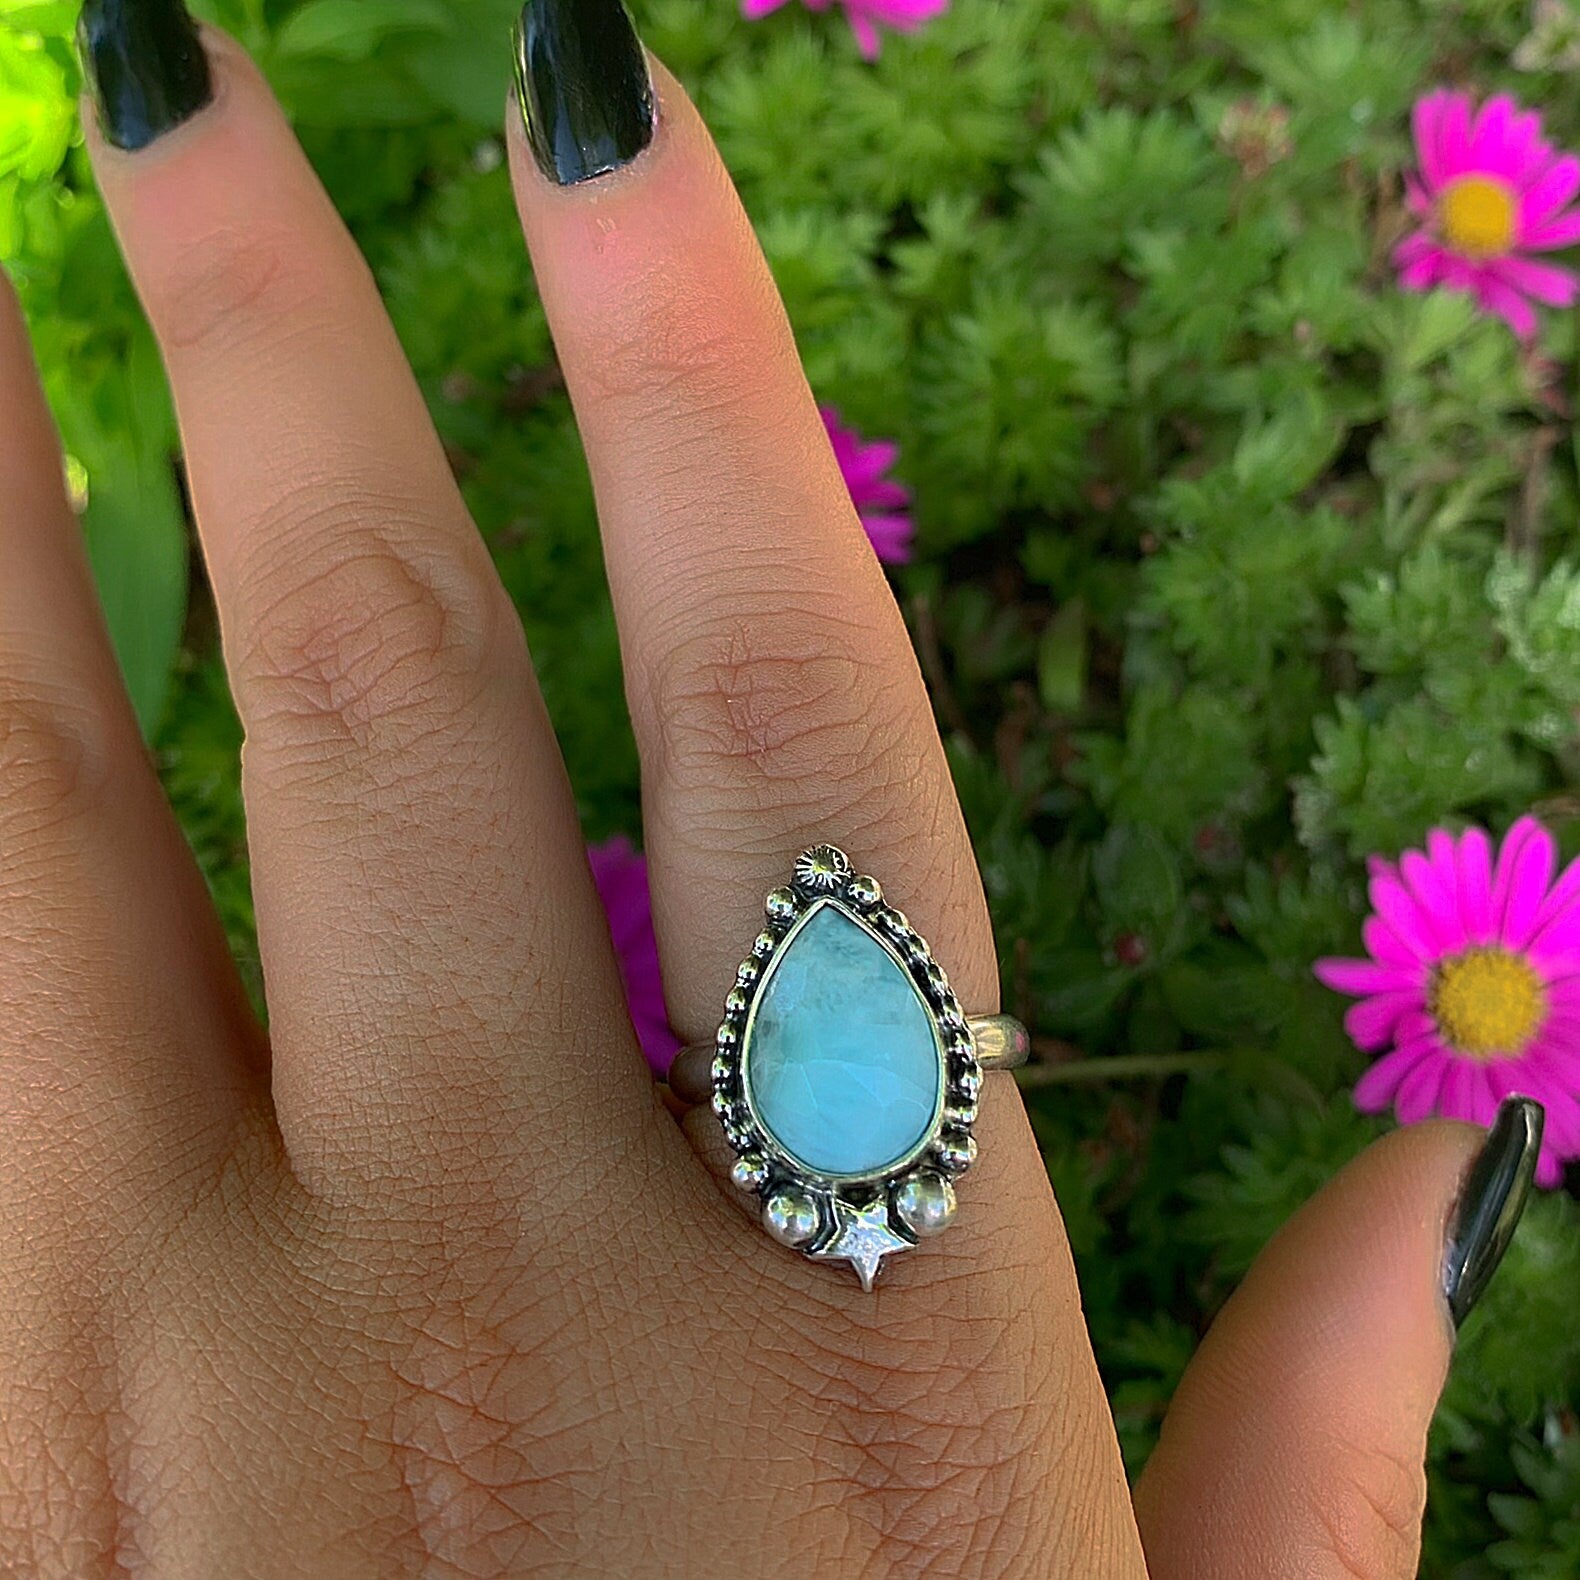 Rose Cut Larimar Ring - Size 8 1/4 - Sterling Silver - Blue Larimar Ring - Teardrop Larimar Jewelry - Handcrafted Faceted Larimar Star Ring